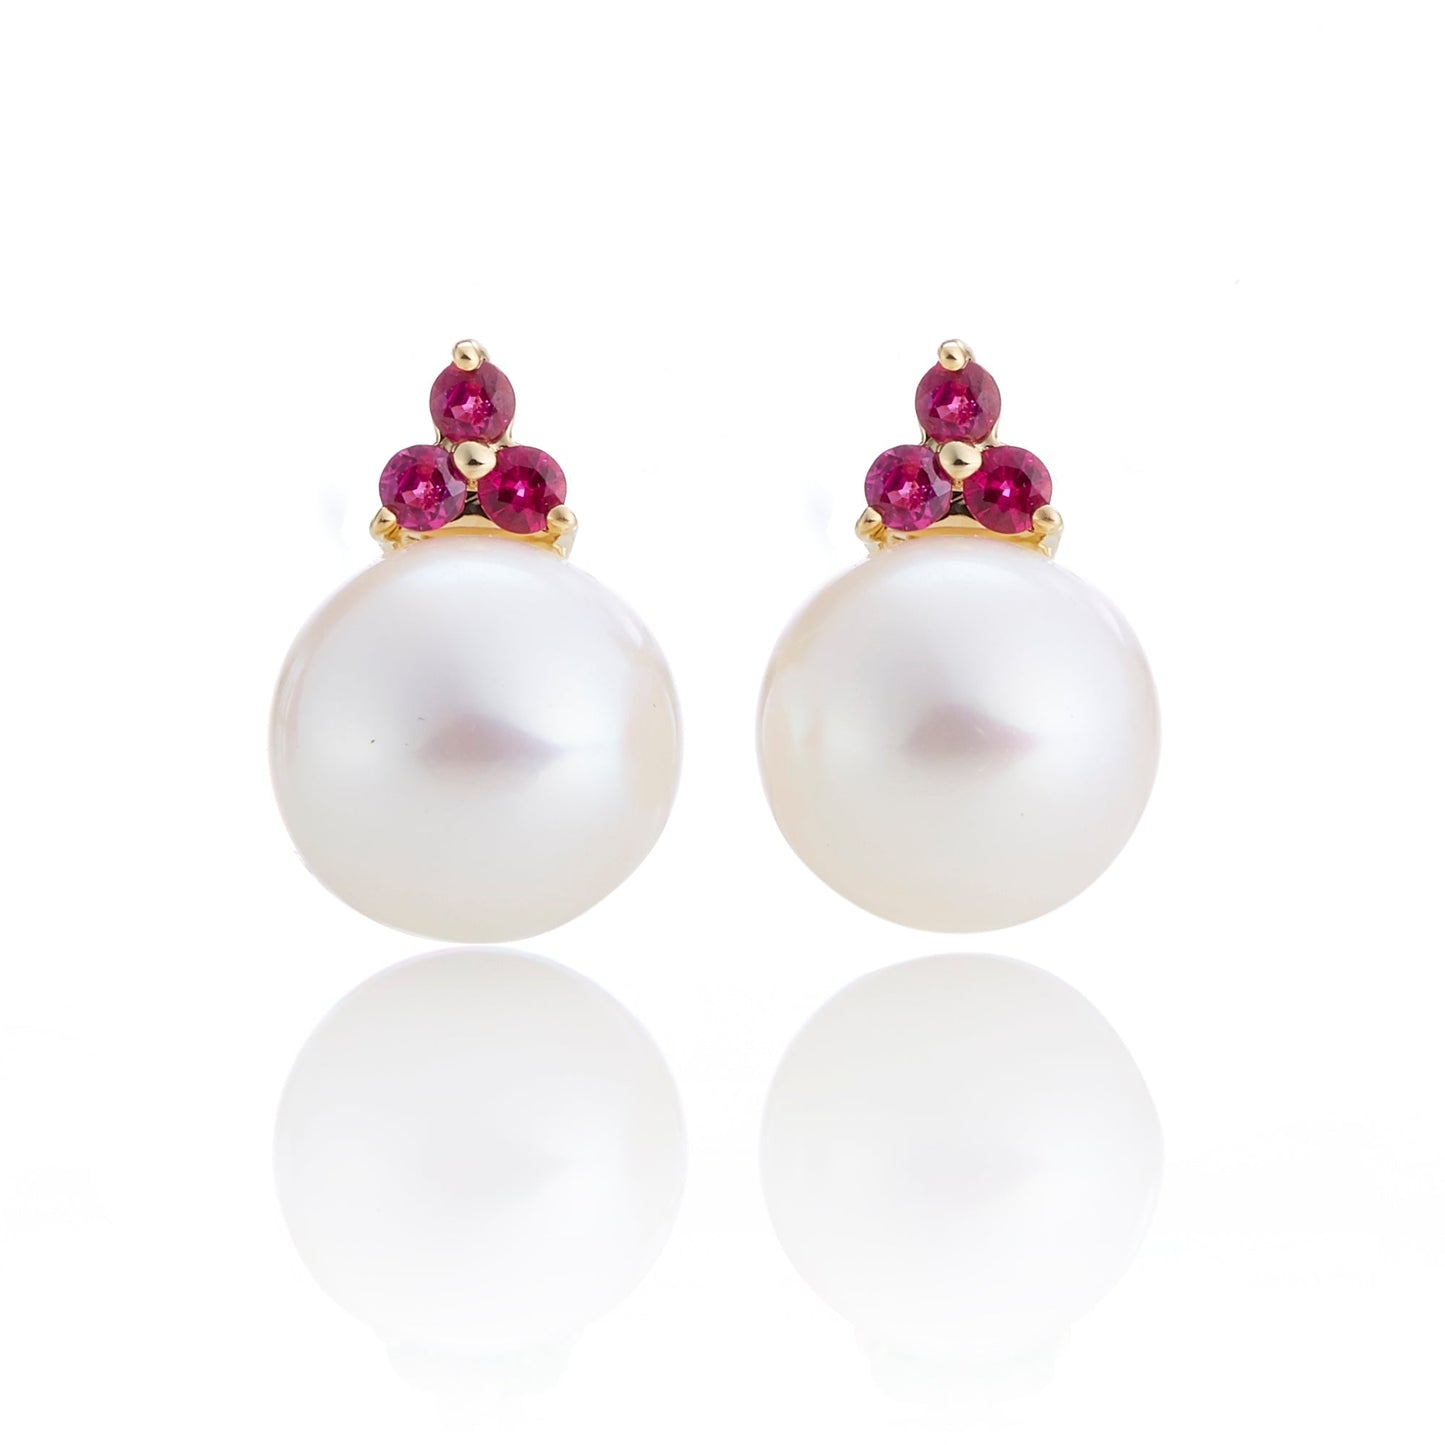 Gump's Signature Madison Earrings in Pearls & Rubies